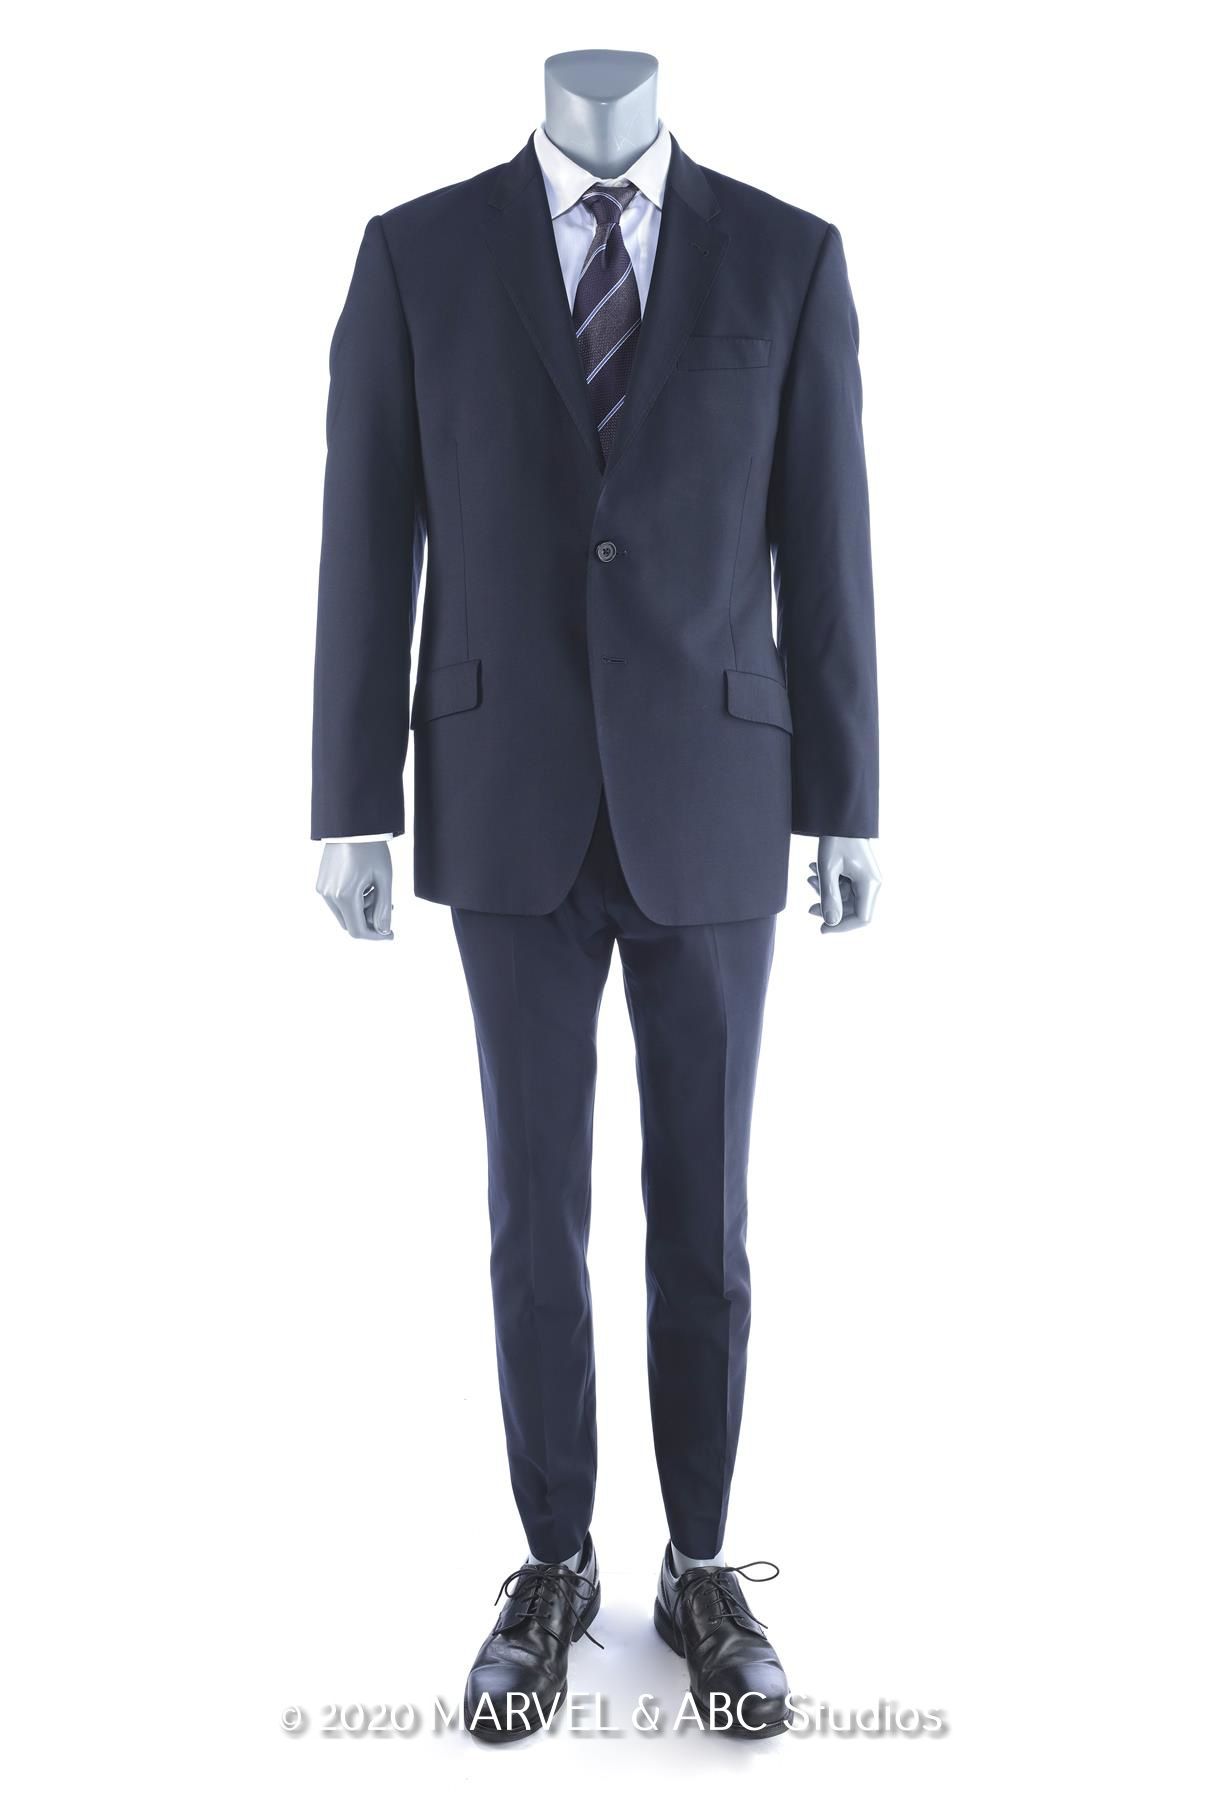 Agents of S.H.I.E.L.D. - 119995_Coulson LMD Costume 01_1